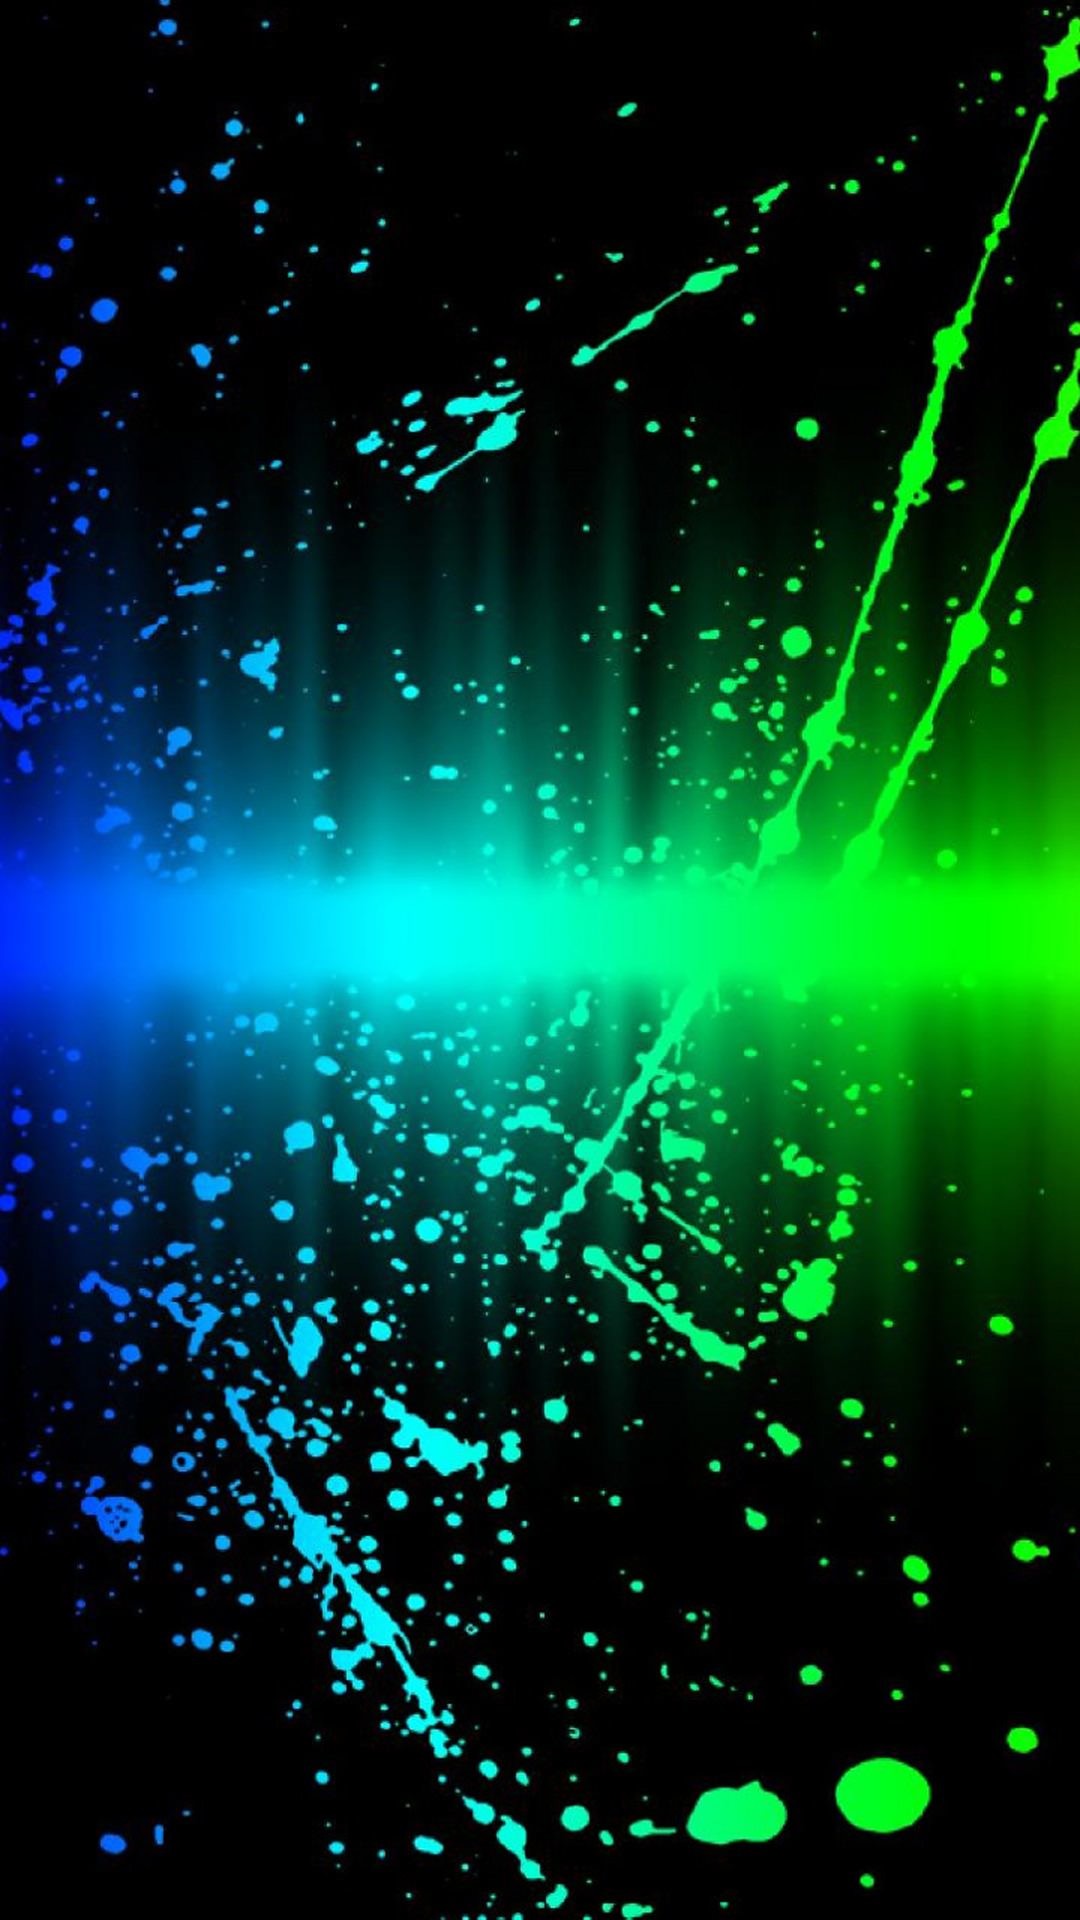 Abstract Blue And Green Neon Wallpaper Data-src /w/full/6/1/9/497891 - Neon  Blue And Green - 1080x1920 Wallpaper 